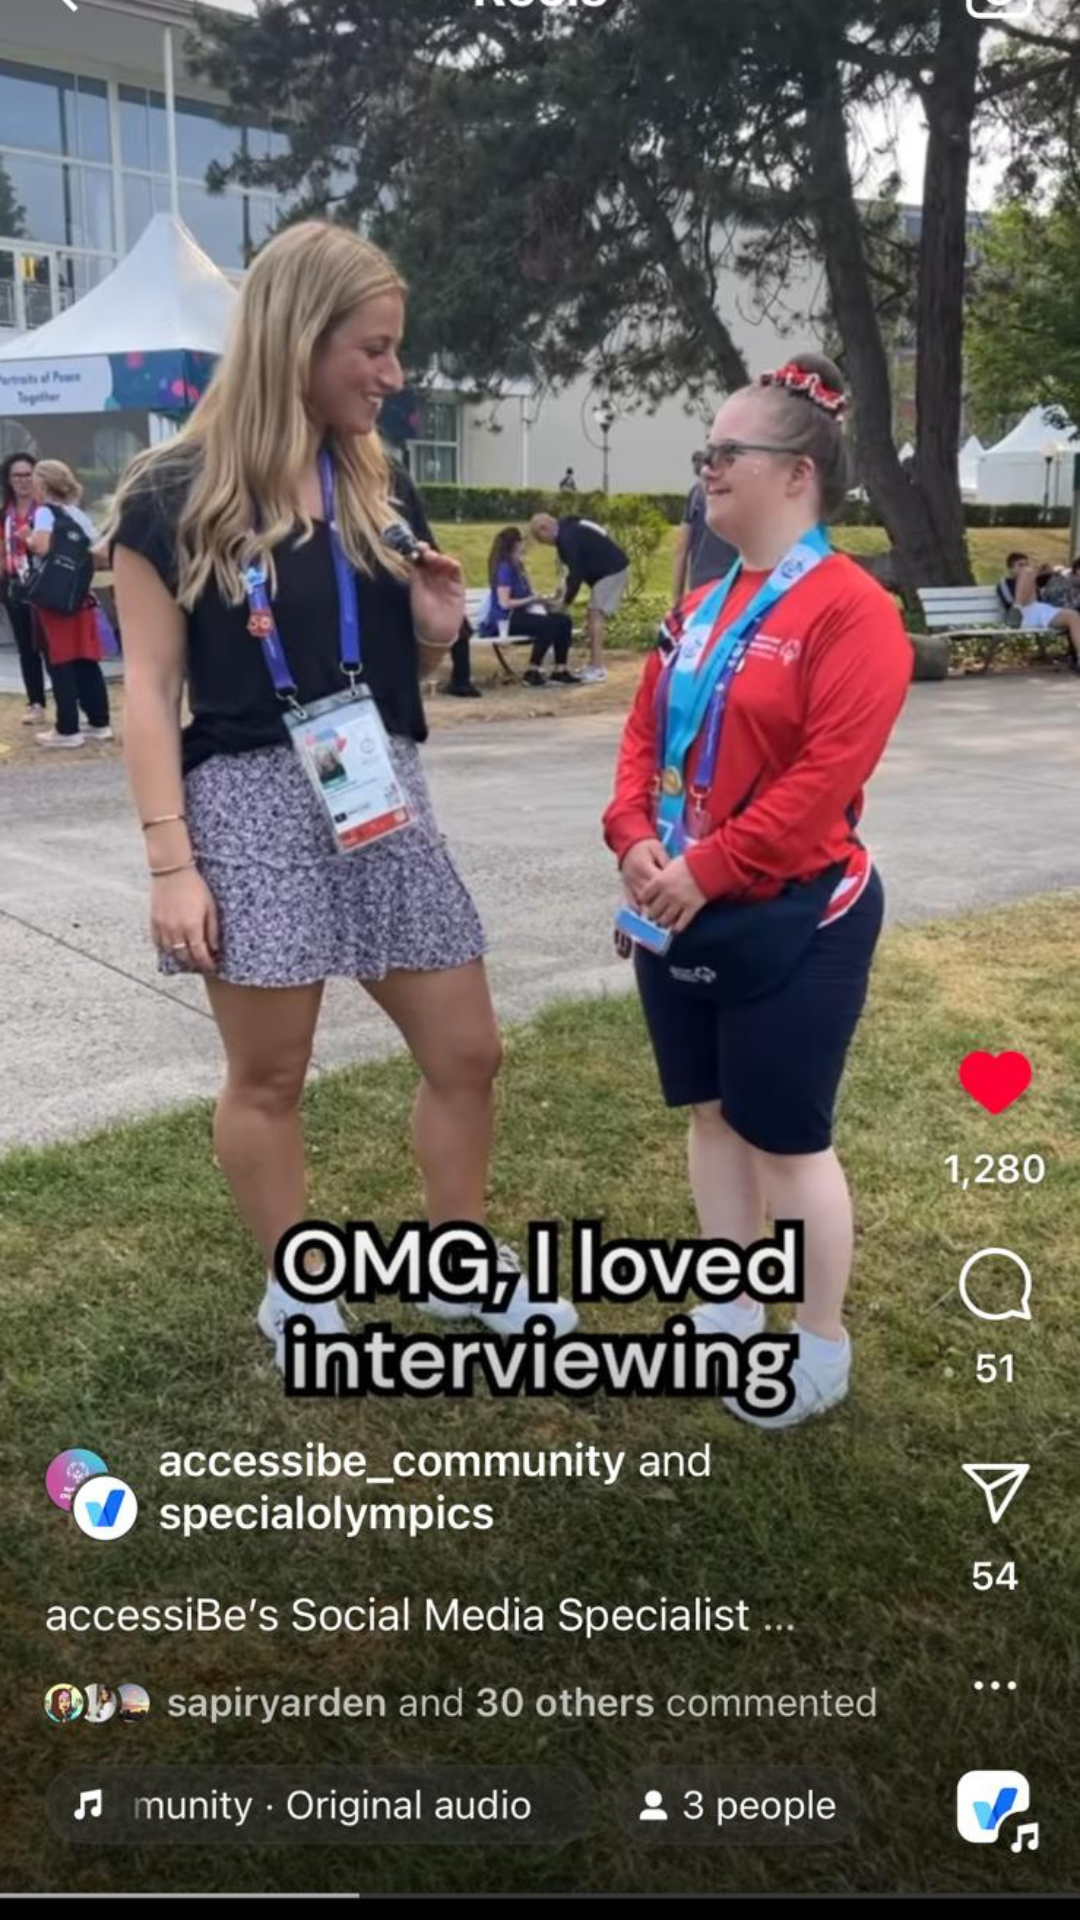 Screenshort of an accessiBe employee and a Special Olympics athlete appearing in an Instagram reel with captions that read "OMG I loved interviewing!"